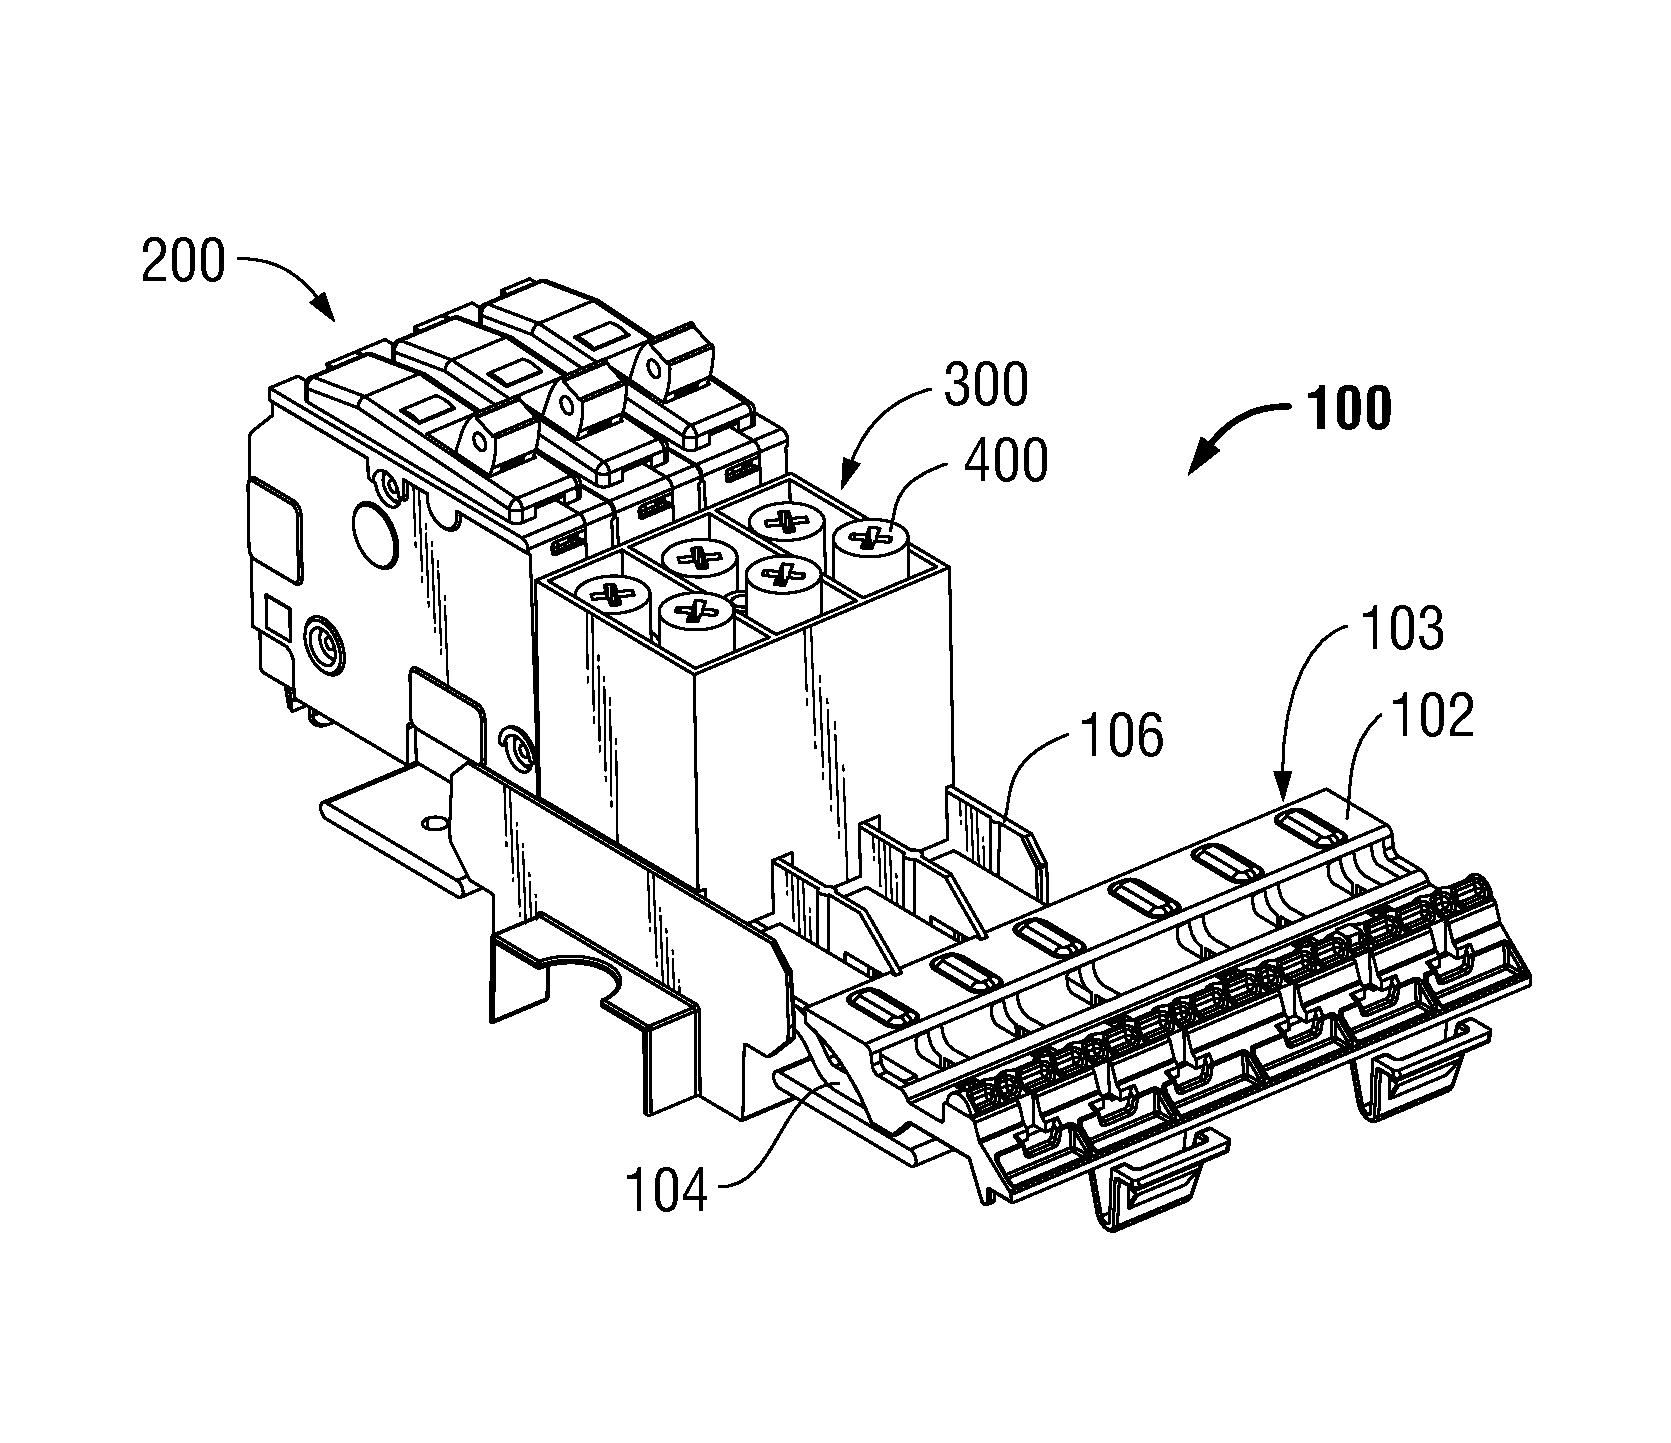 Isolated bolt-on circuit breaker system for an energized panelboard